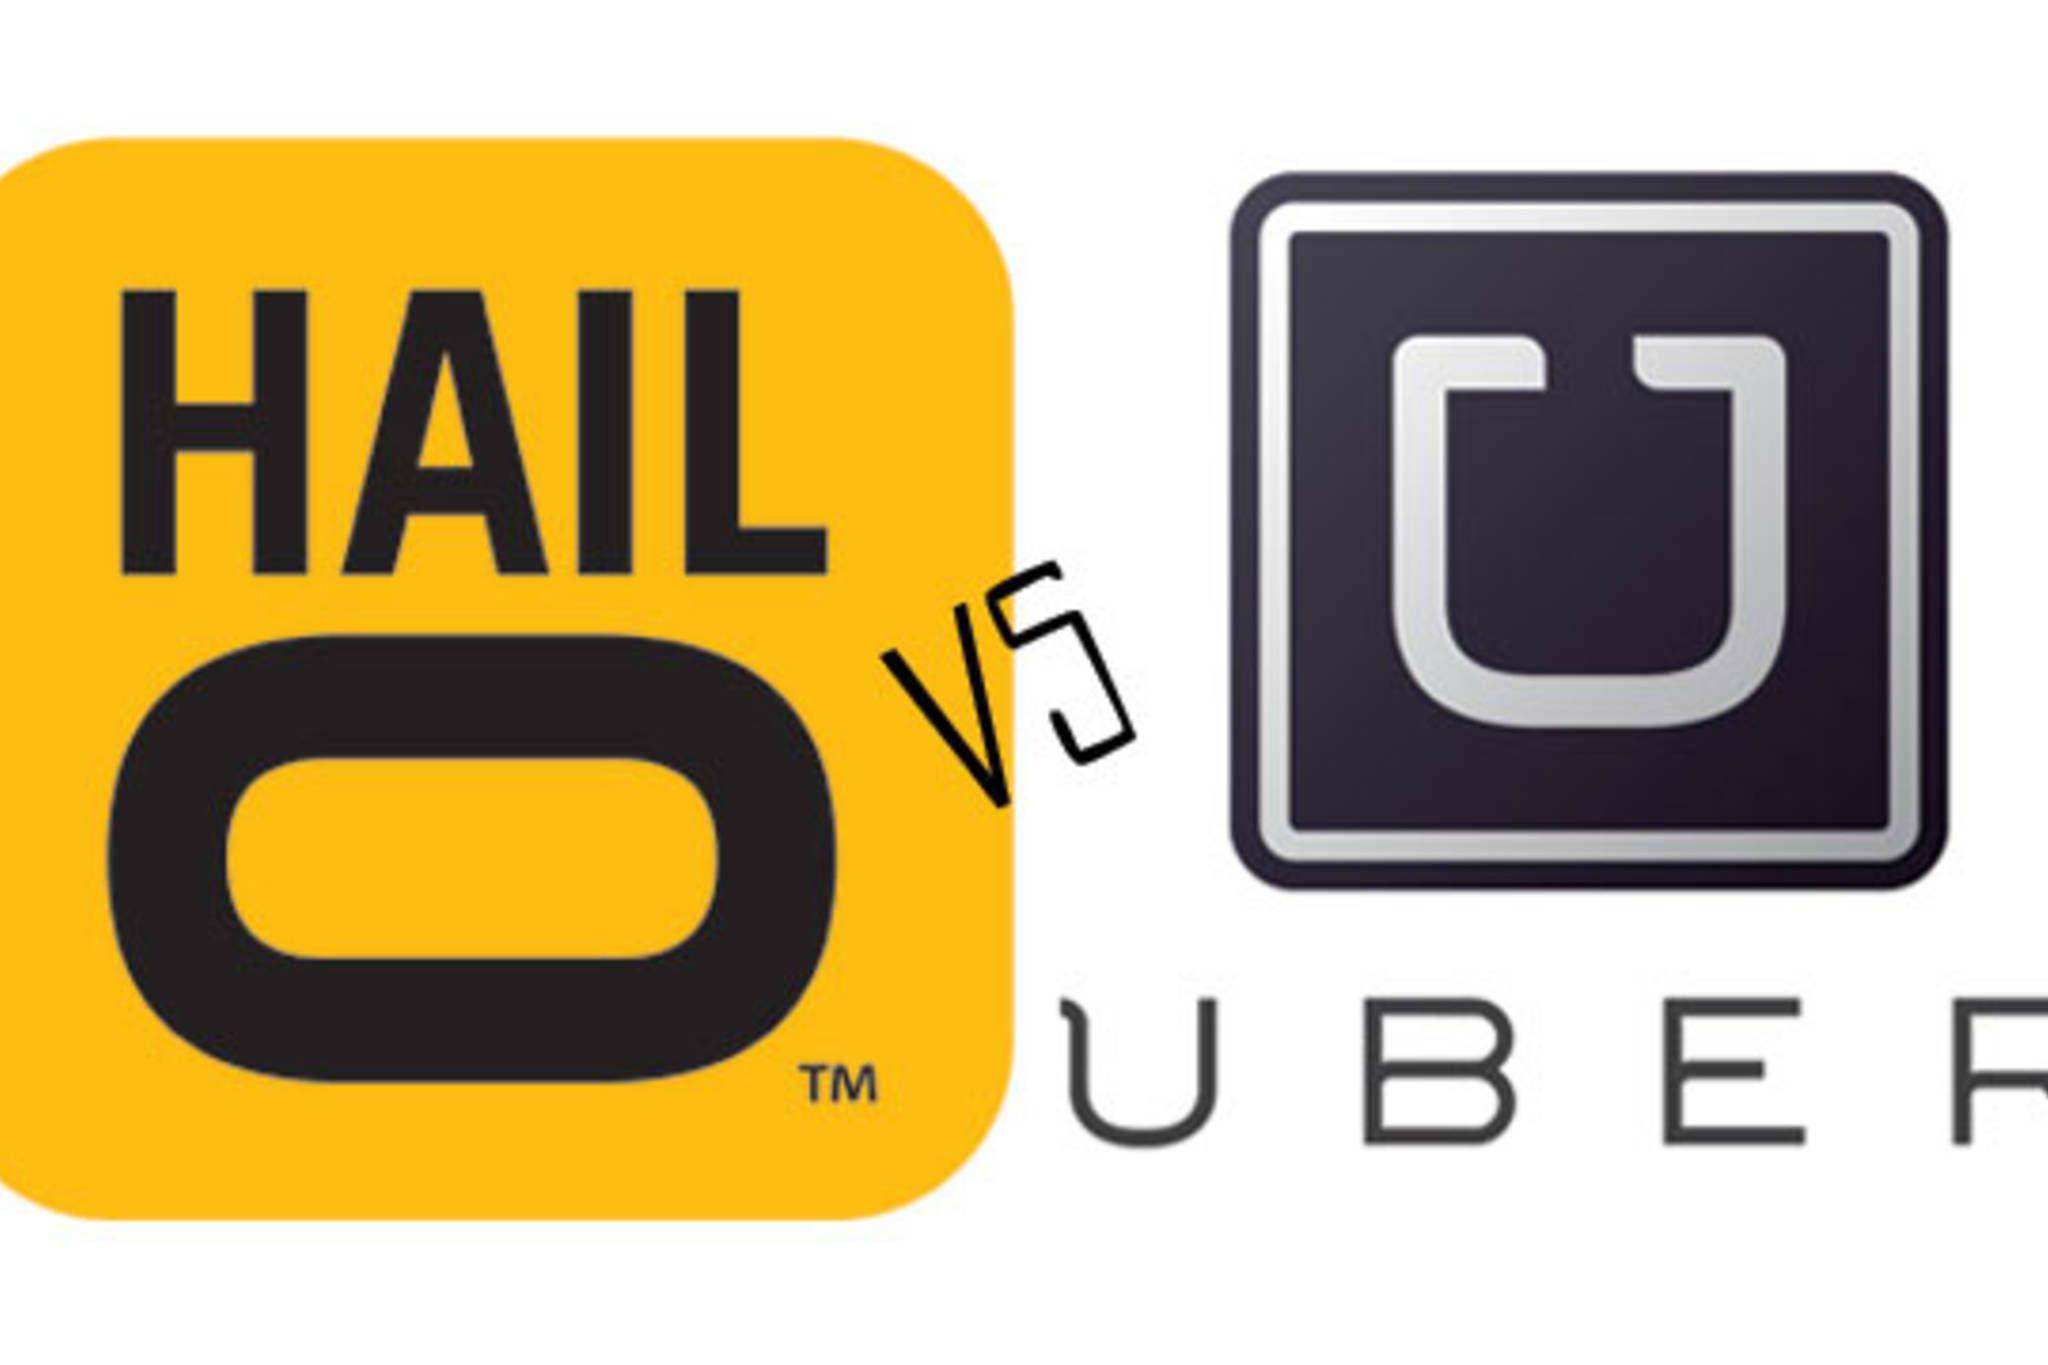 Uber Taxi Logo - What's the difference between Hailo and Uber taxi?